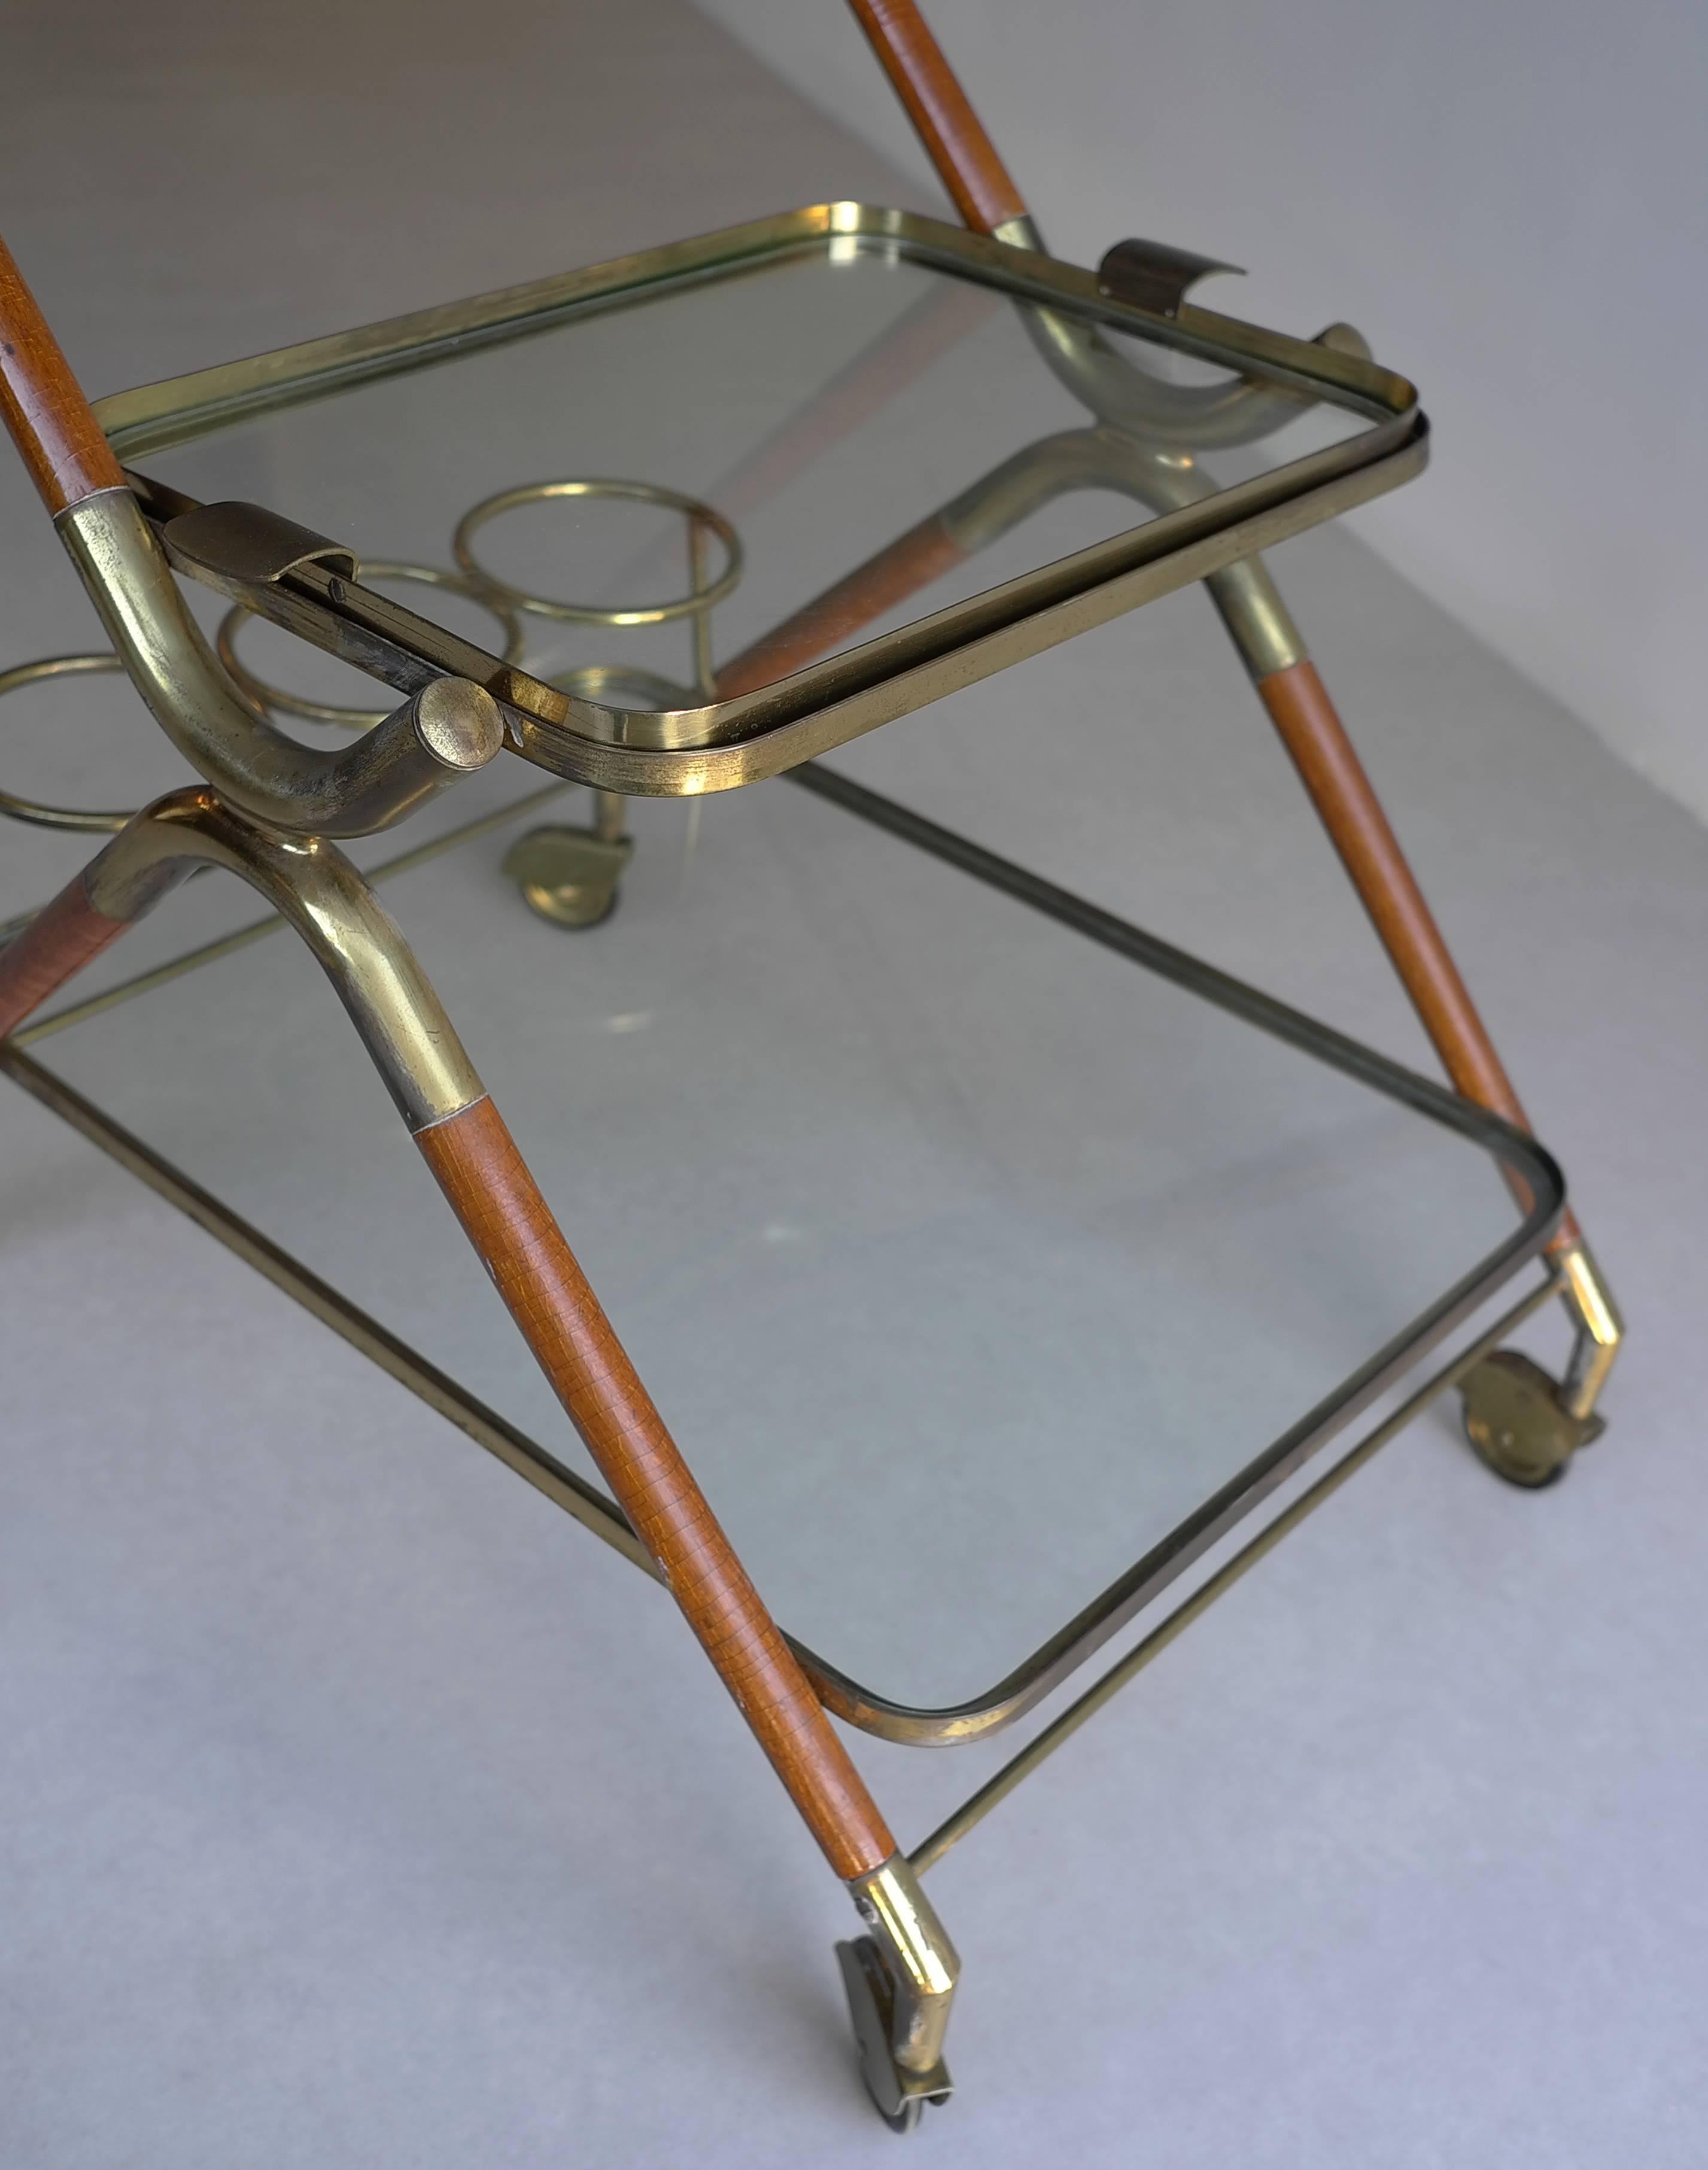 Cesare Lacca Bar Cart, Italy 1950's. Mahogany wood with brass details.
Including bottle holders and detachable tray.